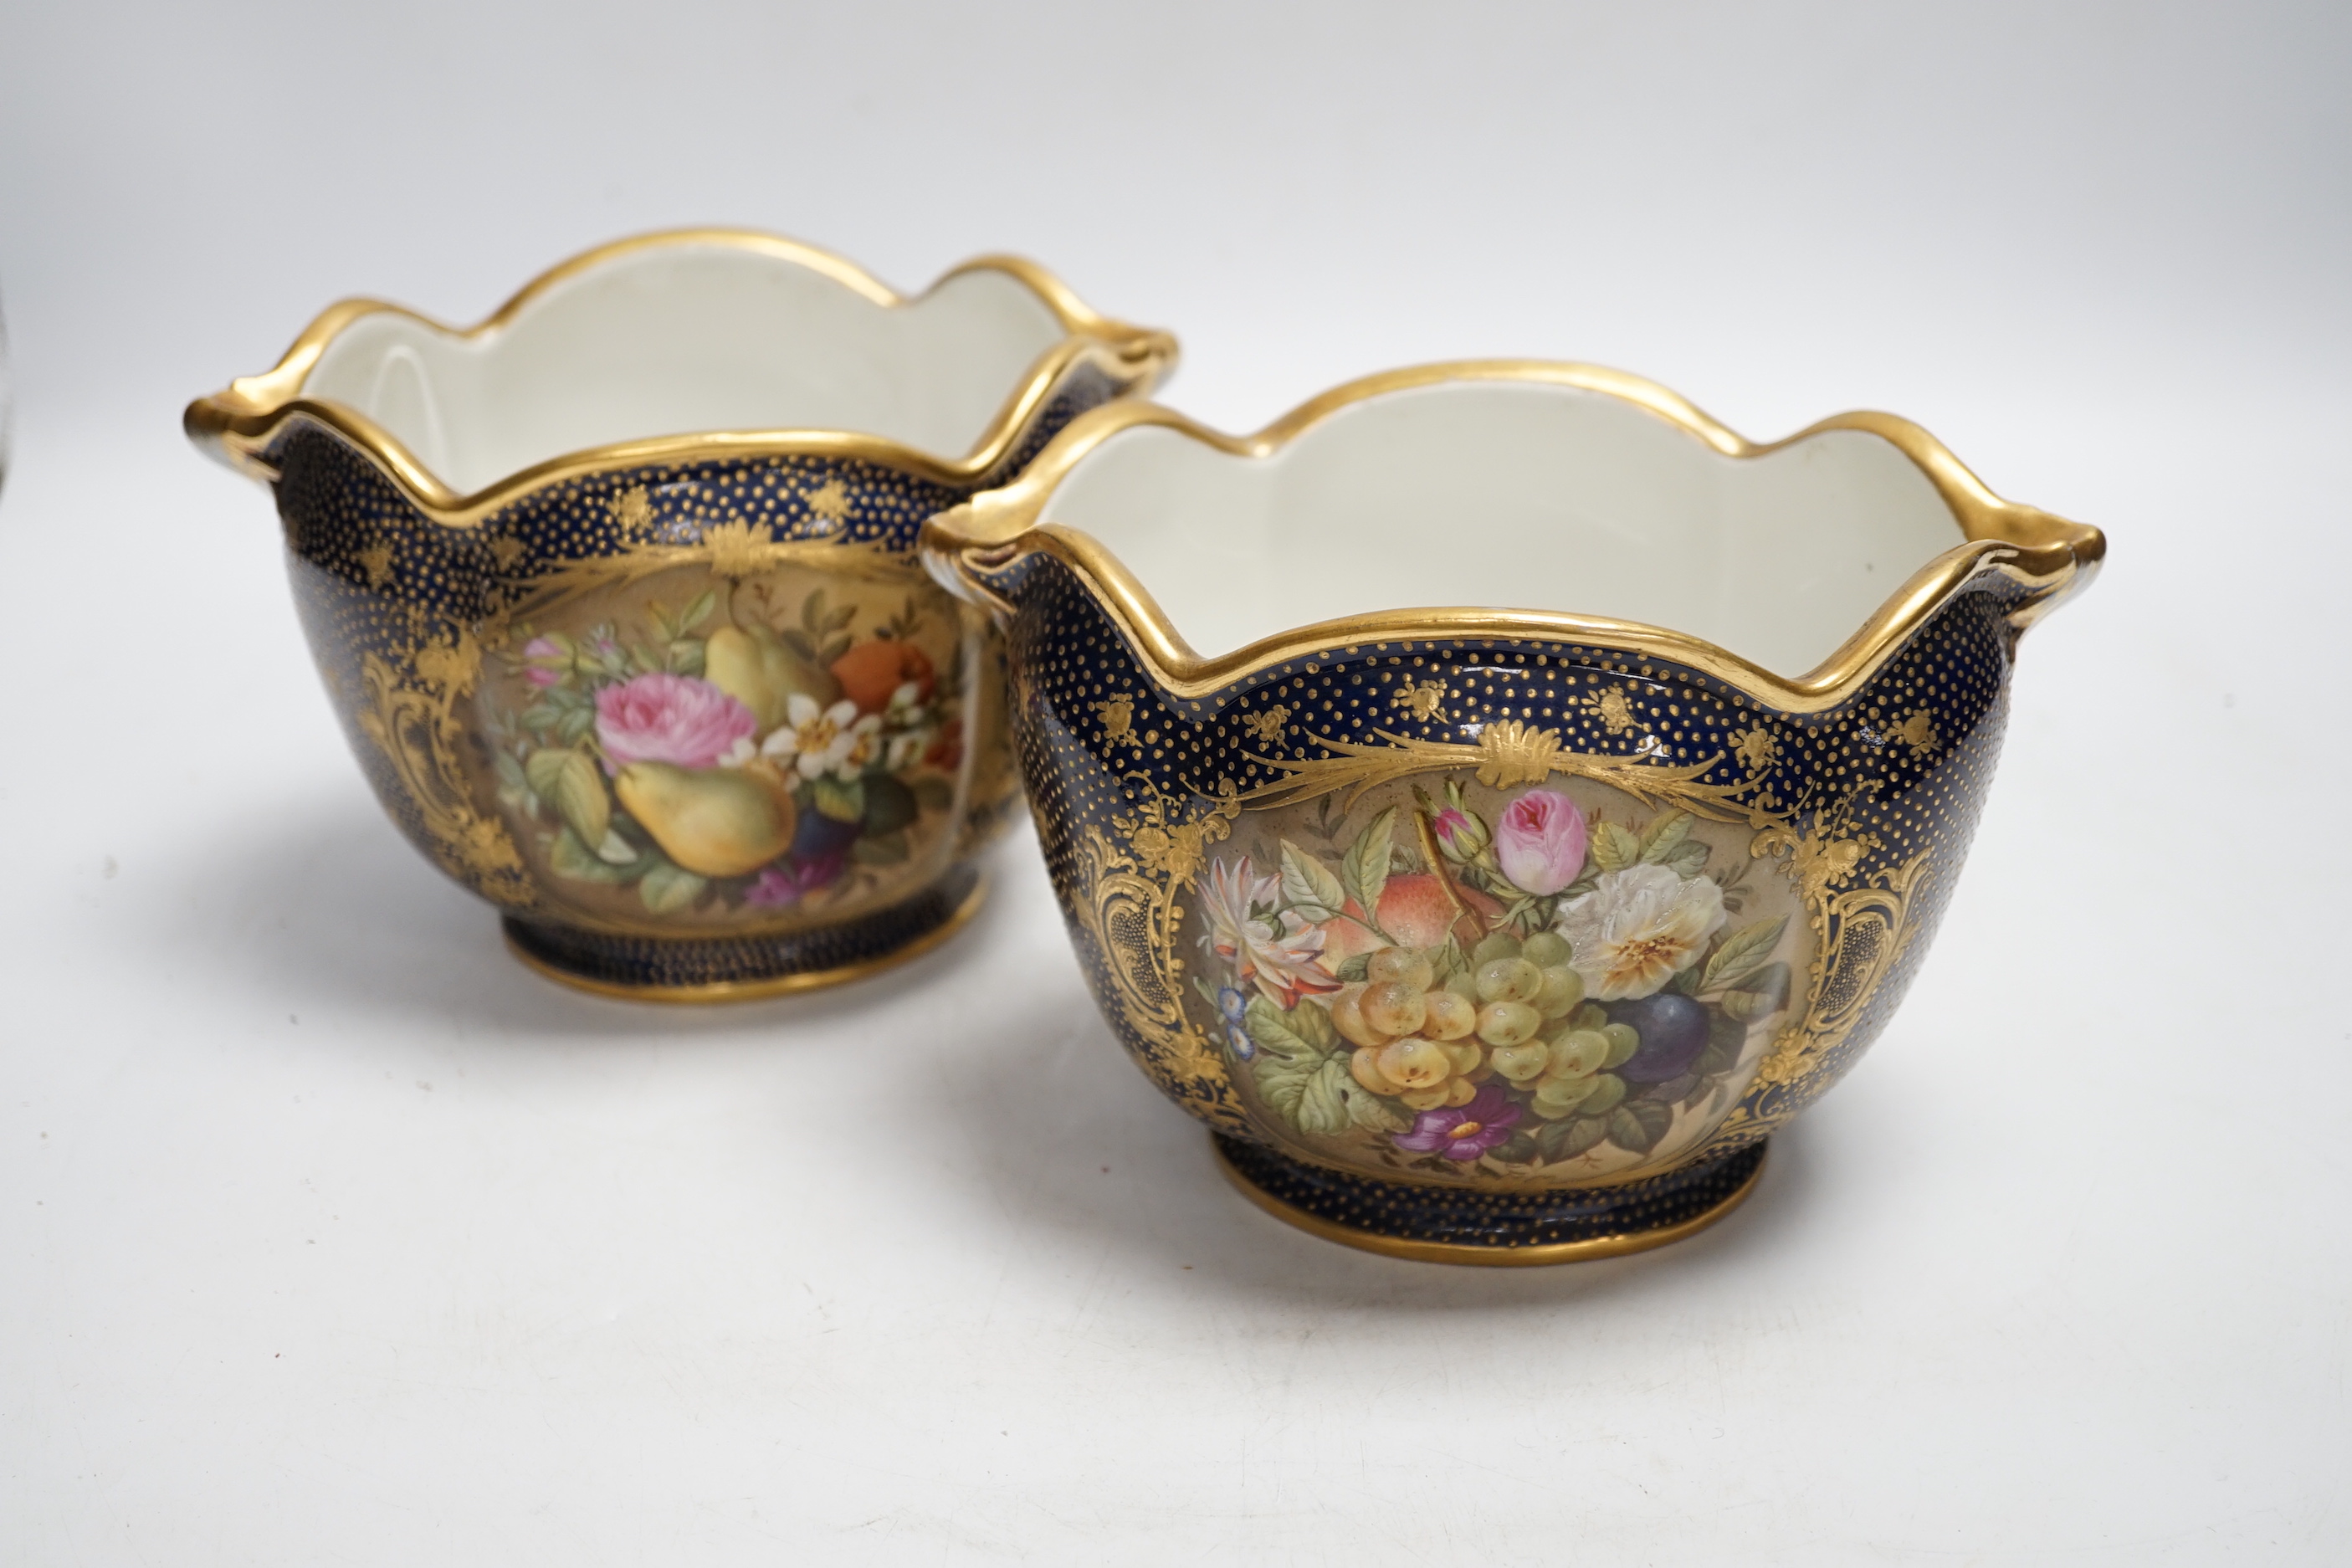 A pair of 19th century Paris porcelain cache pot hand painted with flowers and gilded decoration, 12cm high